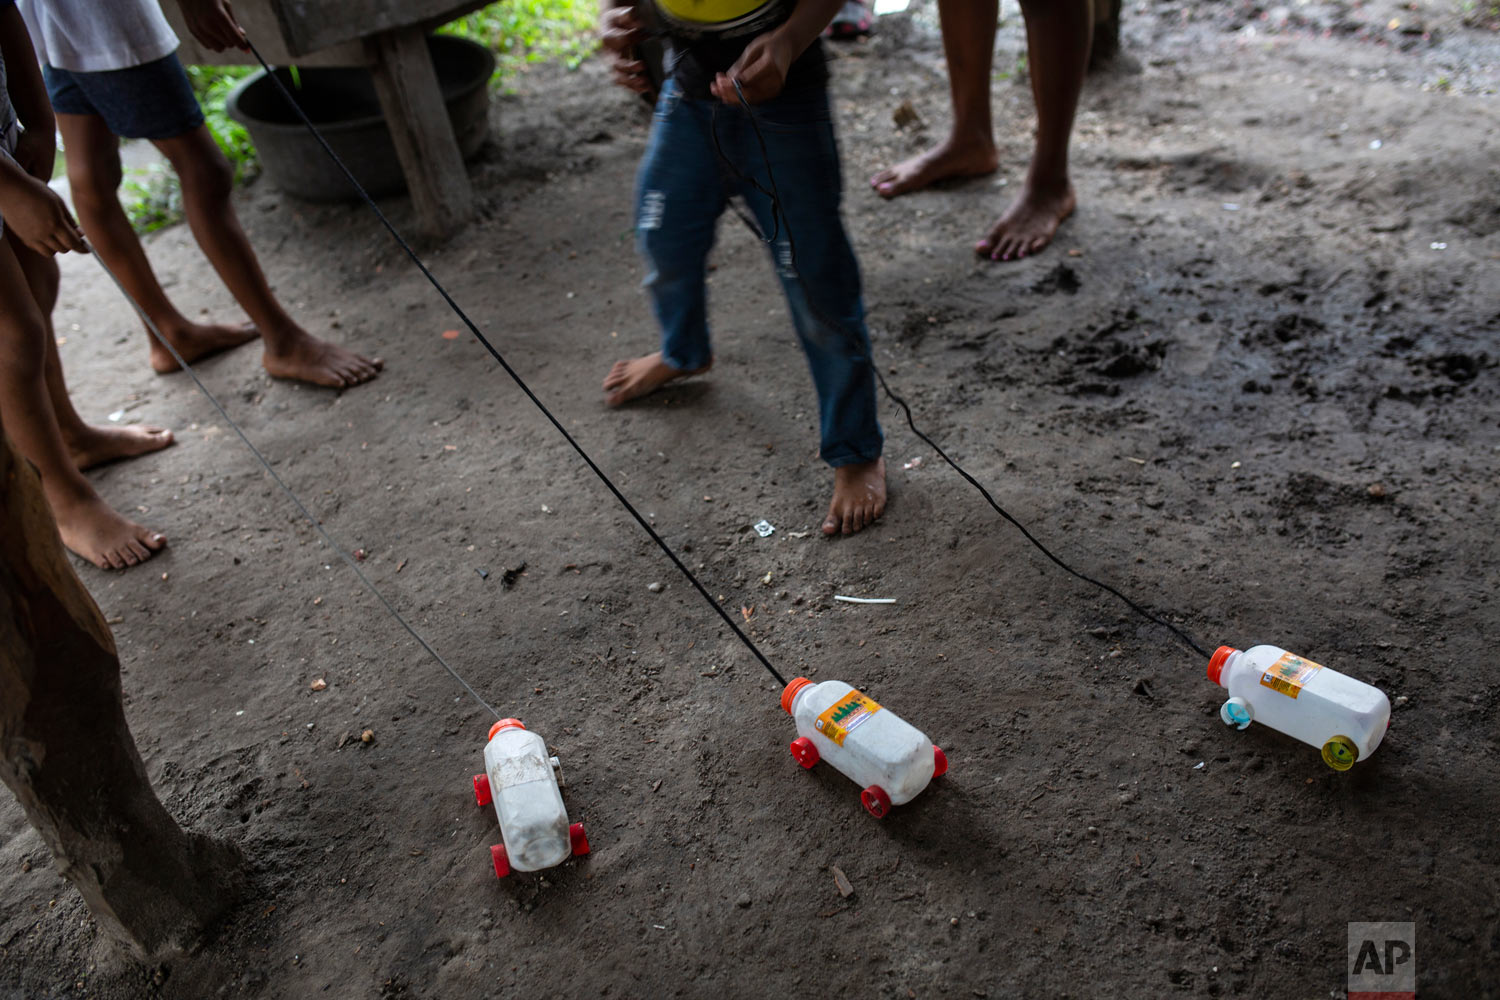  In this Feb. 6, 2018 photo, children hold onto to their toys made with recycled material, in Puerto Lempira, Honduras. A sign of the poverty, boys crafted toy trucks from plastic juice boxes with lids for wheels. For grown-ups, the only option they’